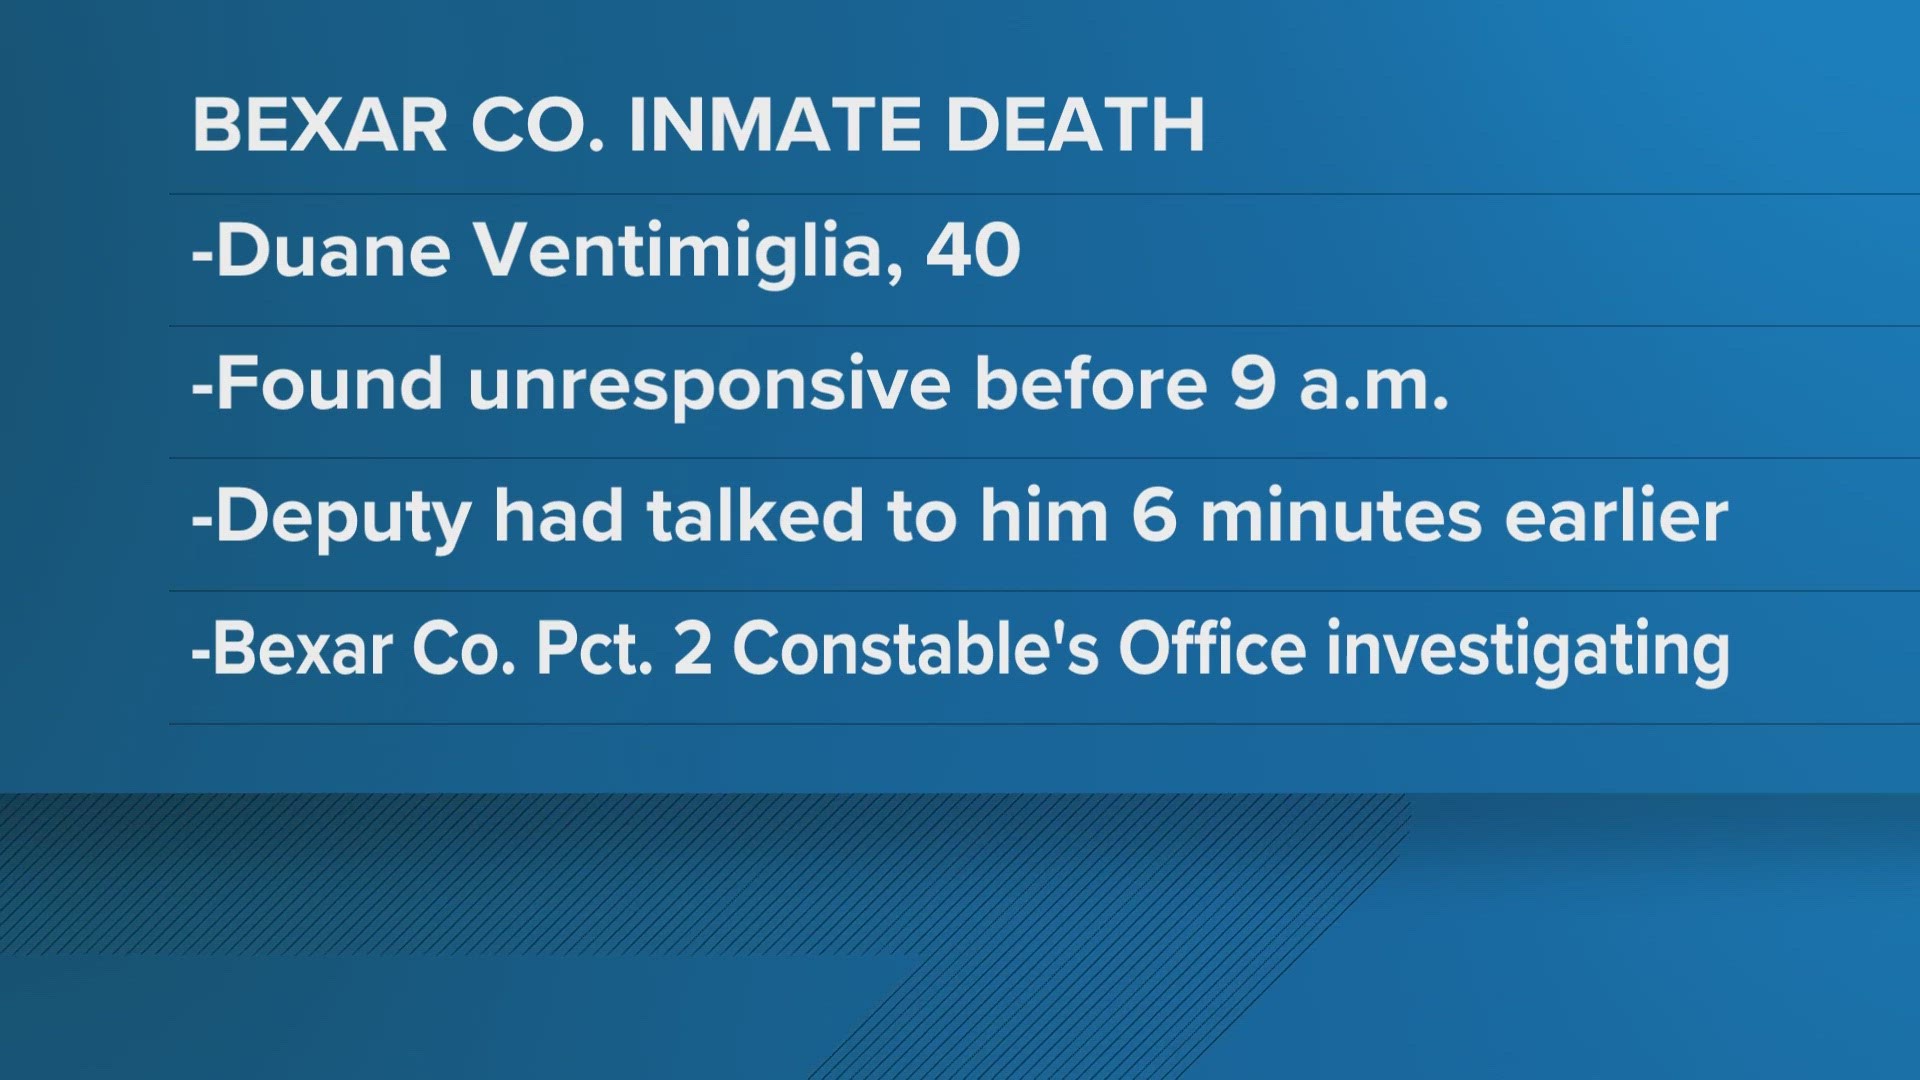 The 40-year-old was found unresponsive in the jail.